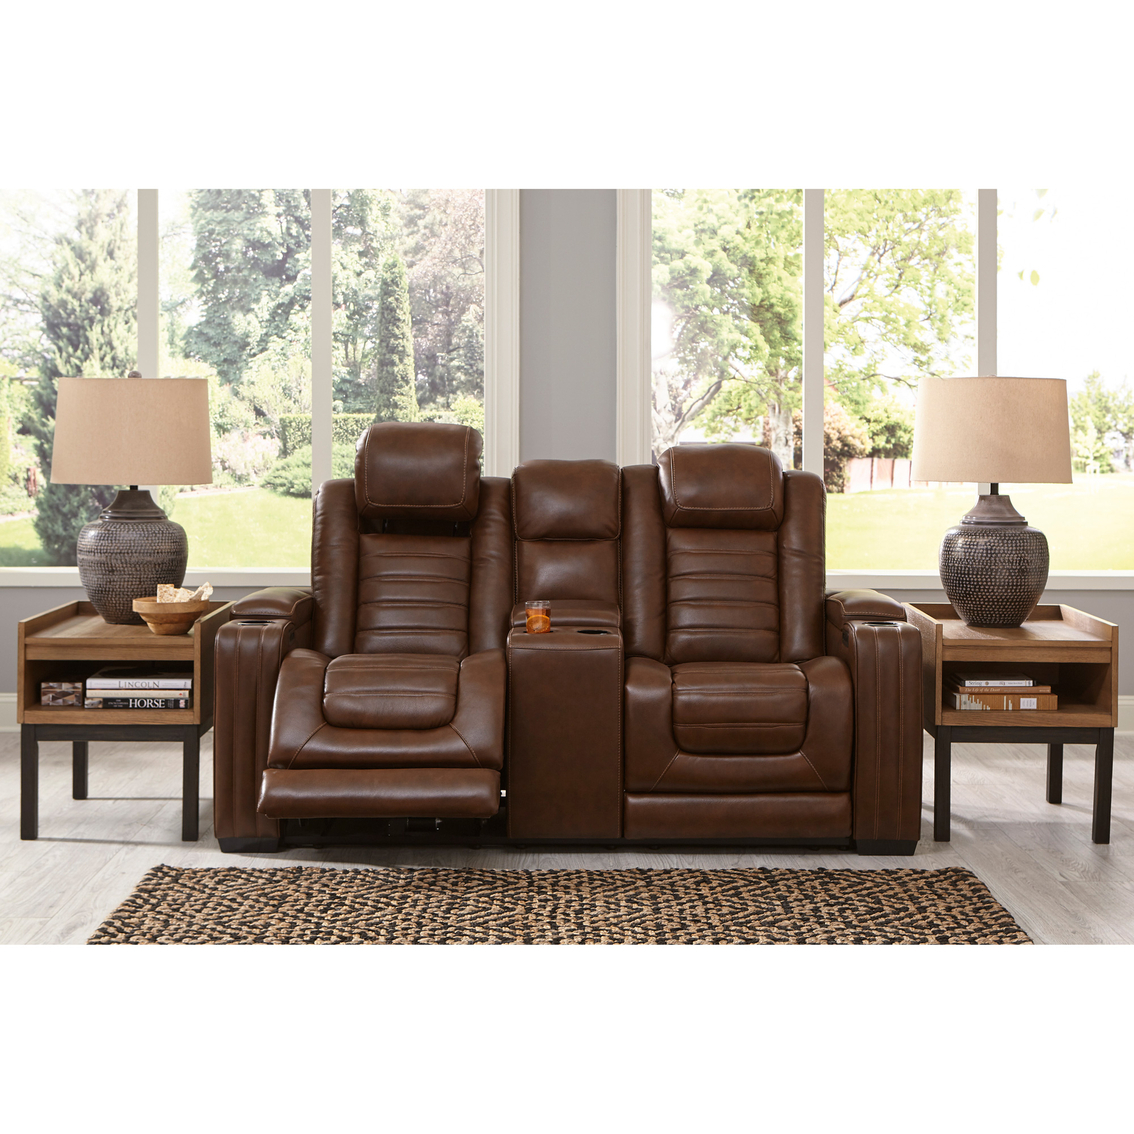 Signature Design by Ashley Backtrack Power Reclining Loveseat with Console - Image 5 of 10